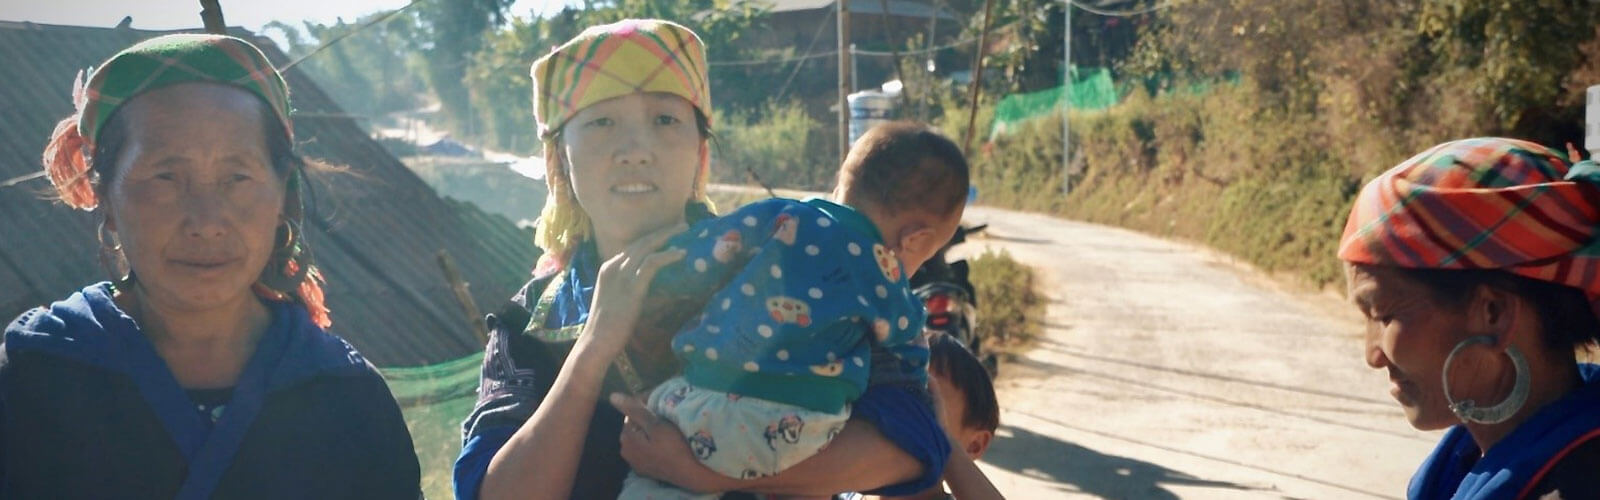 A woman carrying a toddler with two women in the background